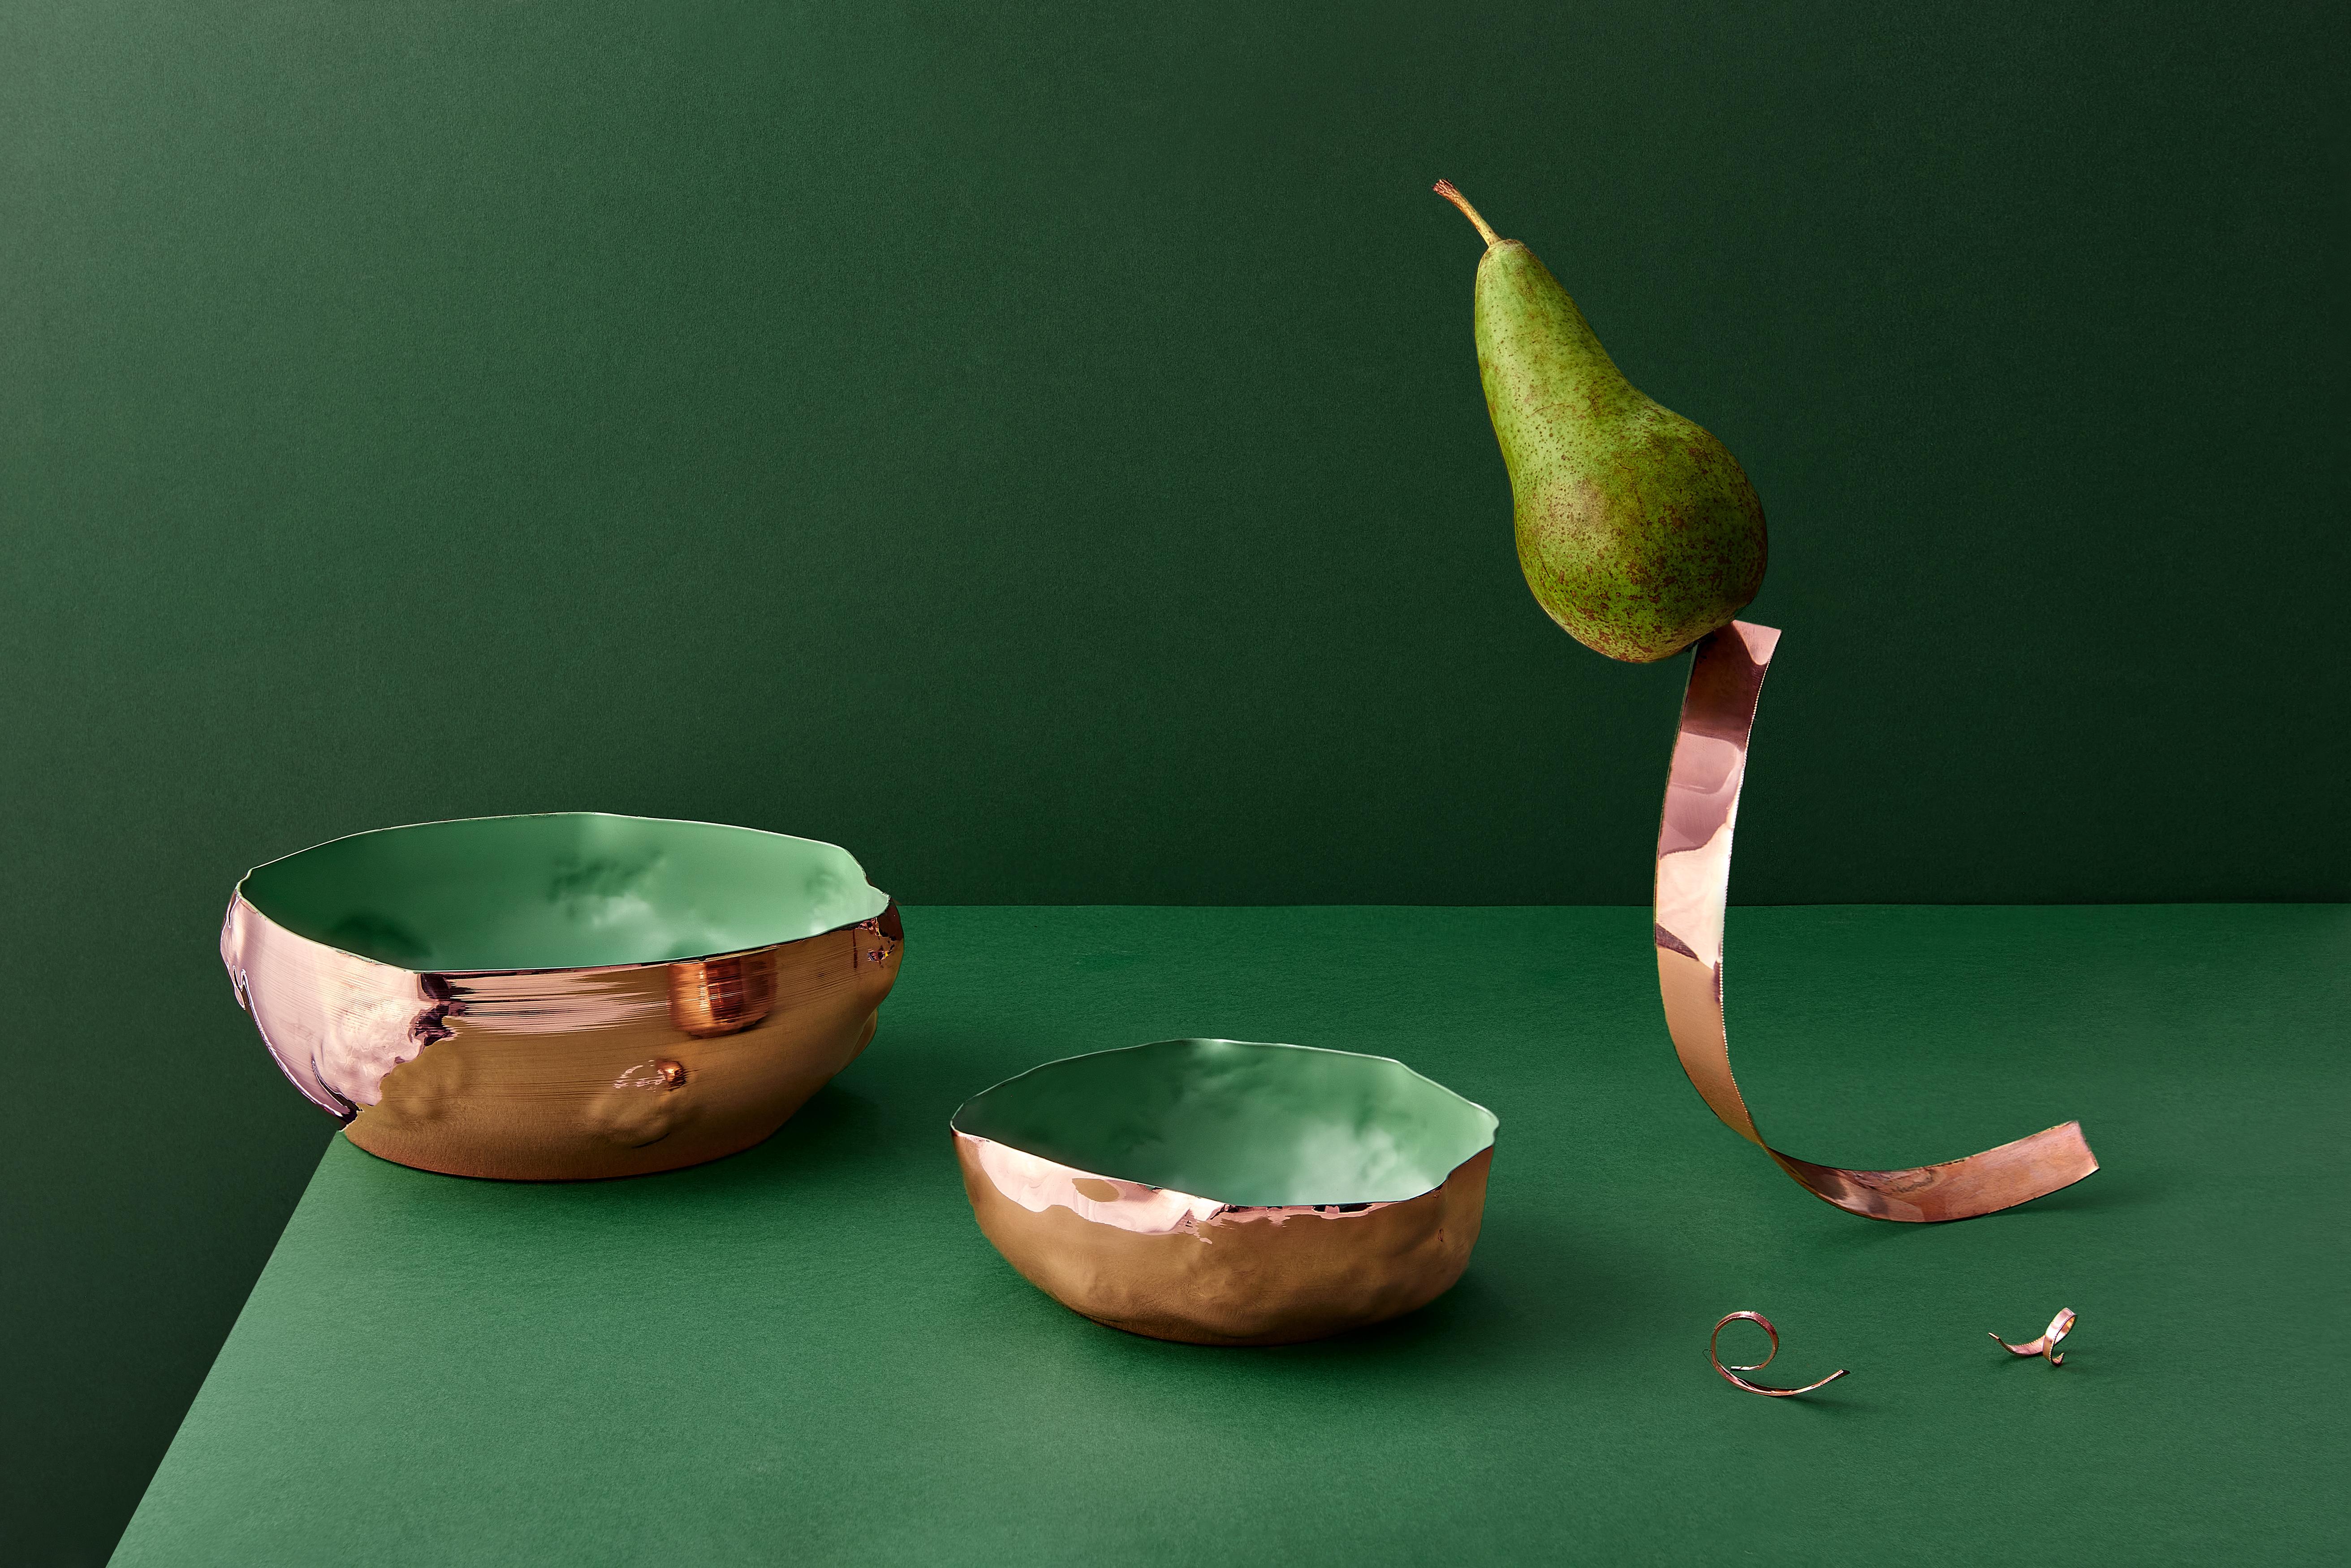 The Momento Collection by Jordan Keaney is a series of hand-formed bowls, in Brass, Copper and Aluminium. After a ‘blank canvas’ bowl form is spun on the lathe, keaney hammers the bowls to shape, as he calls it ‘heating and beating’, placing each